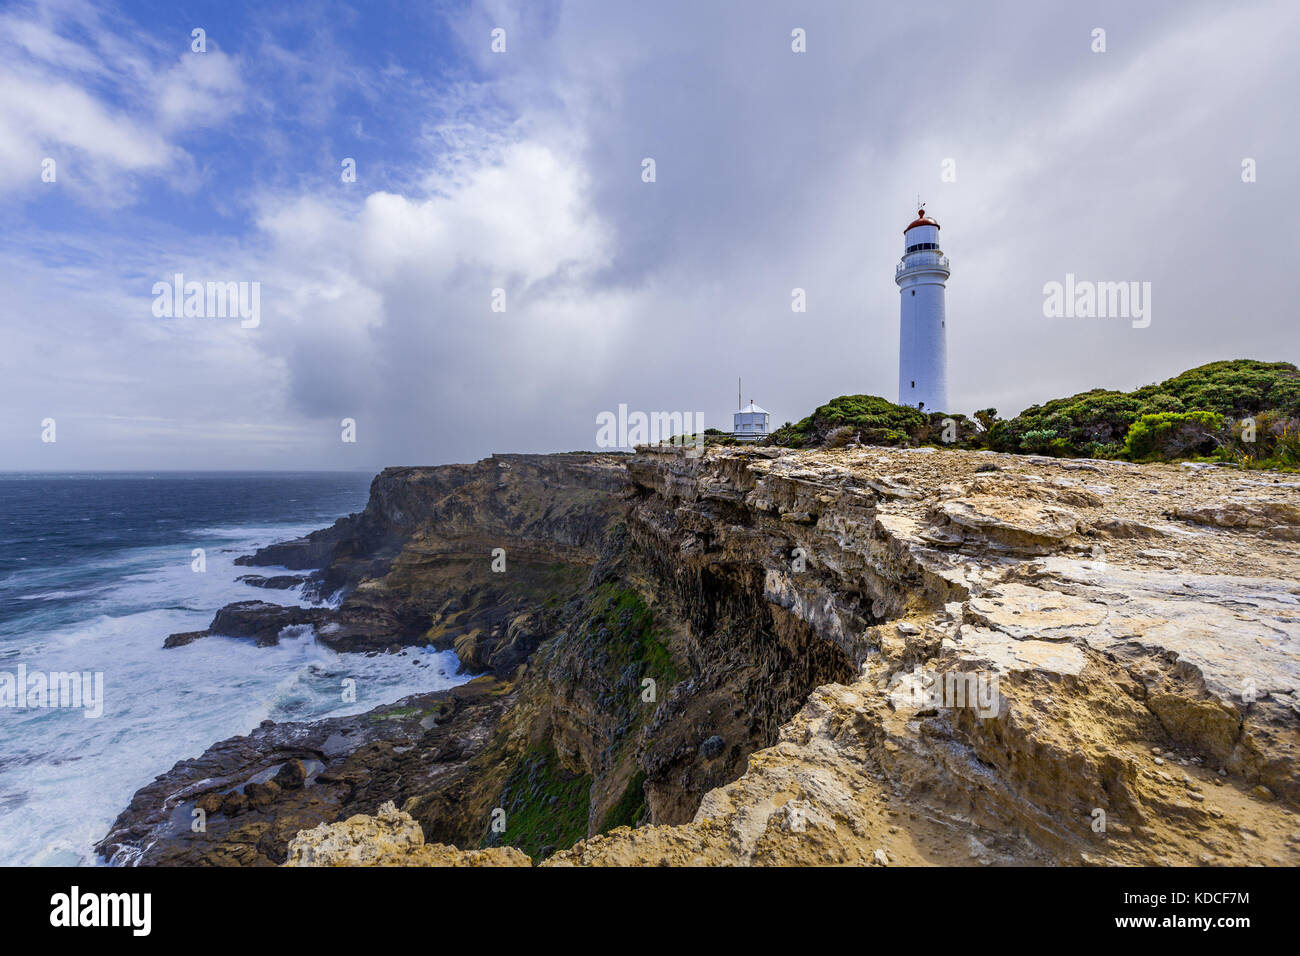 Cape Nelson lighthouse standing on a rugged cliff above ocean under stormy skies. Victoria, Australia. Stock Photo